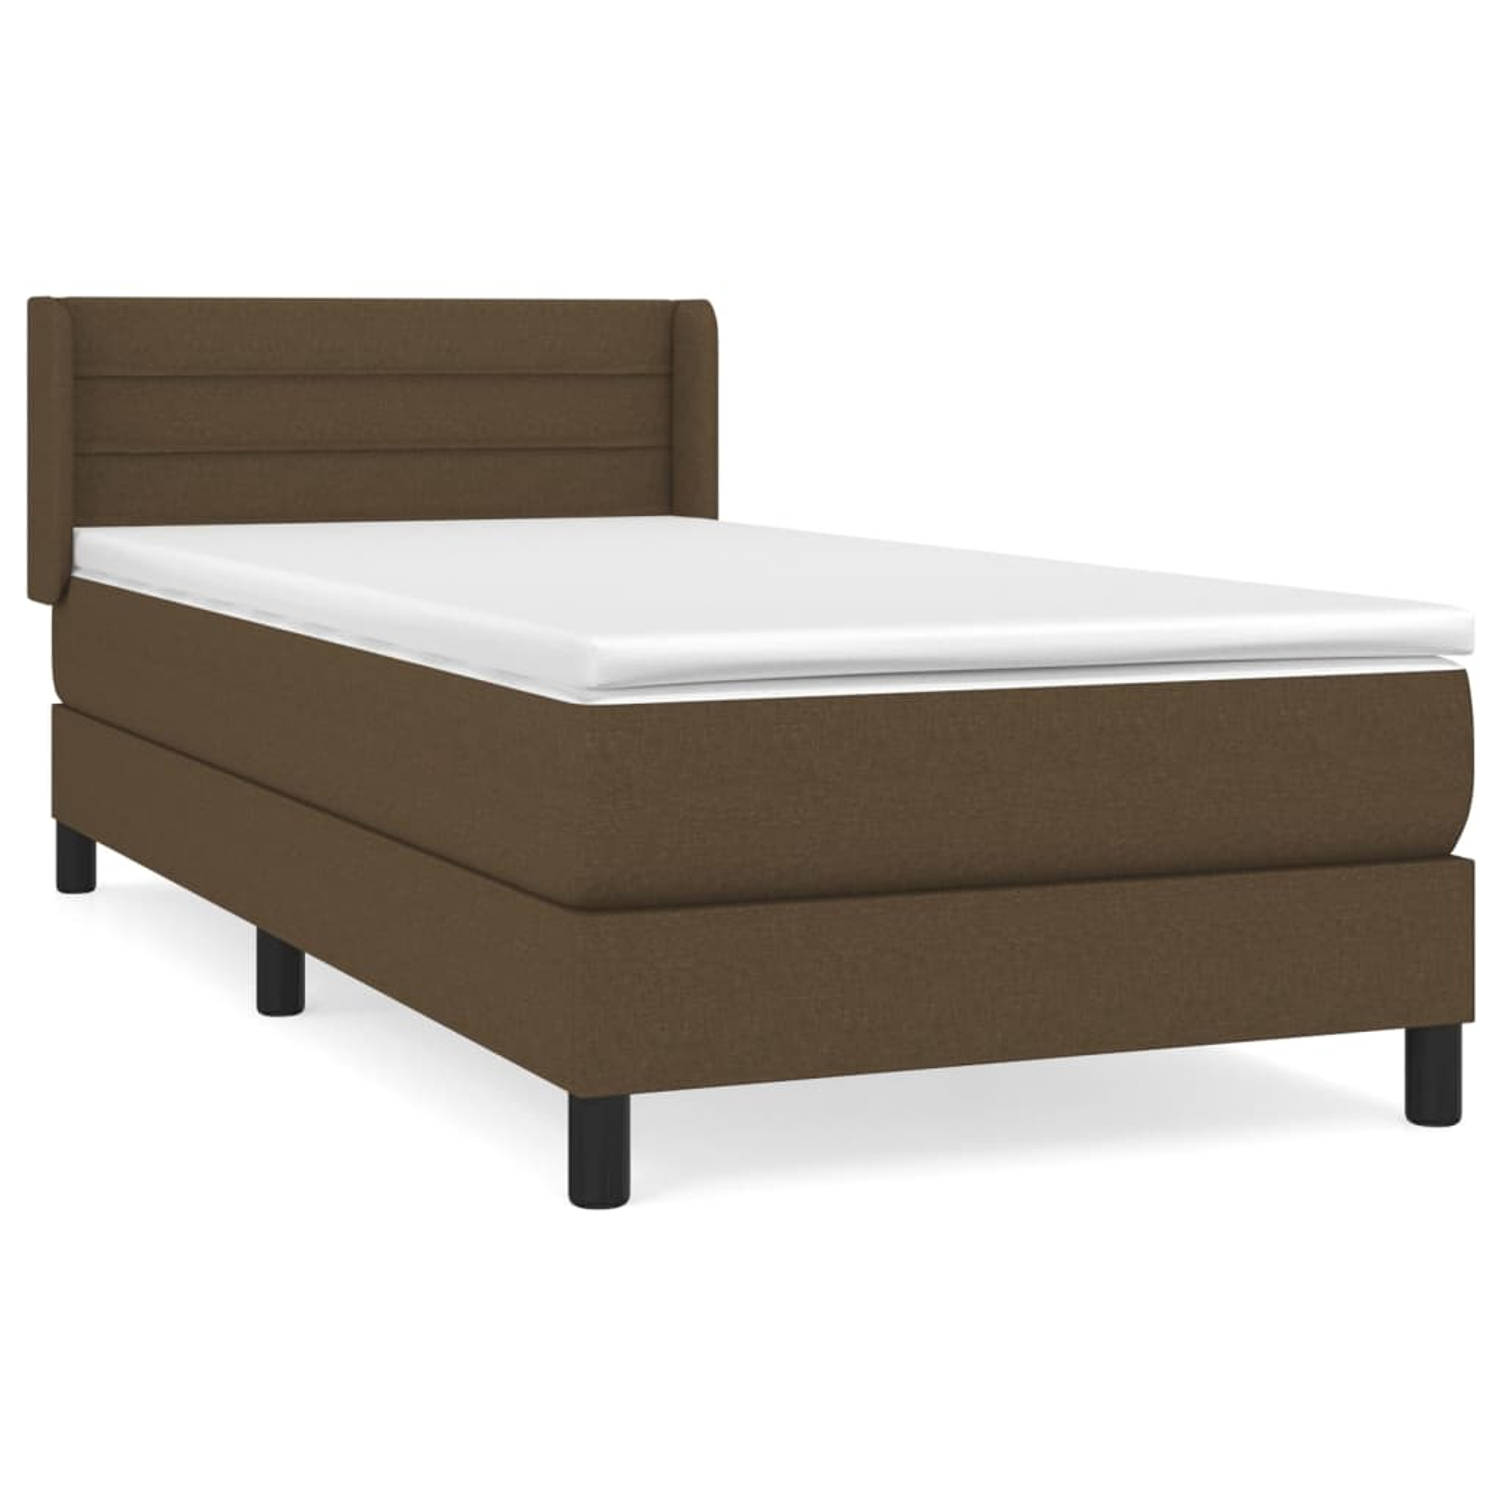 The Living Store Boxspringbed - Bed 193x93x78/88 - Donkerbruin - Stof - Larikshout